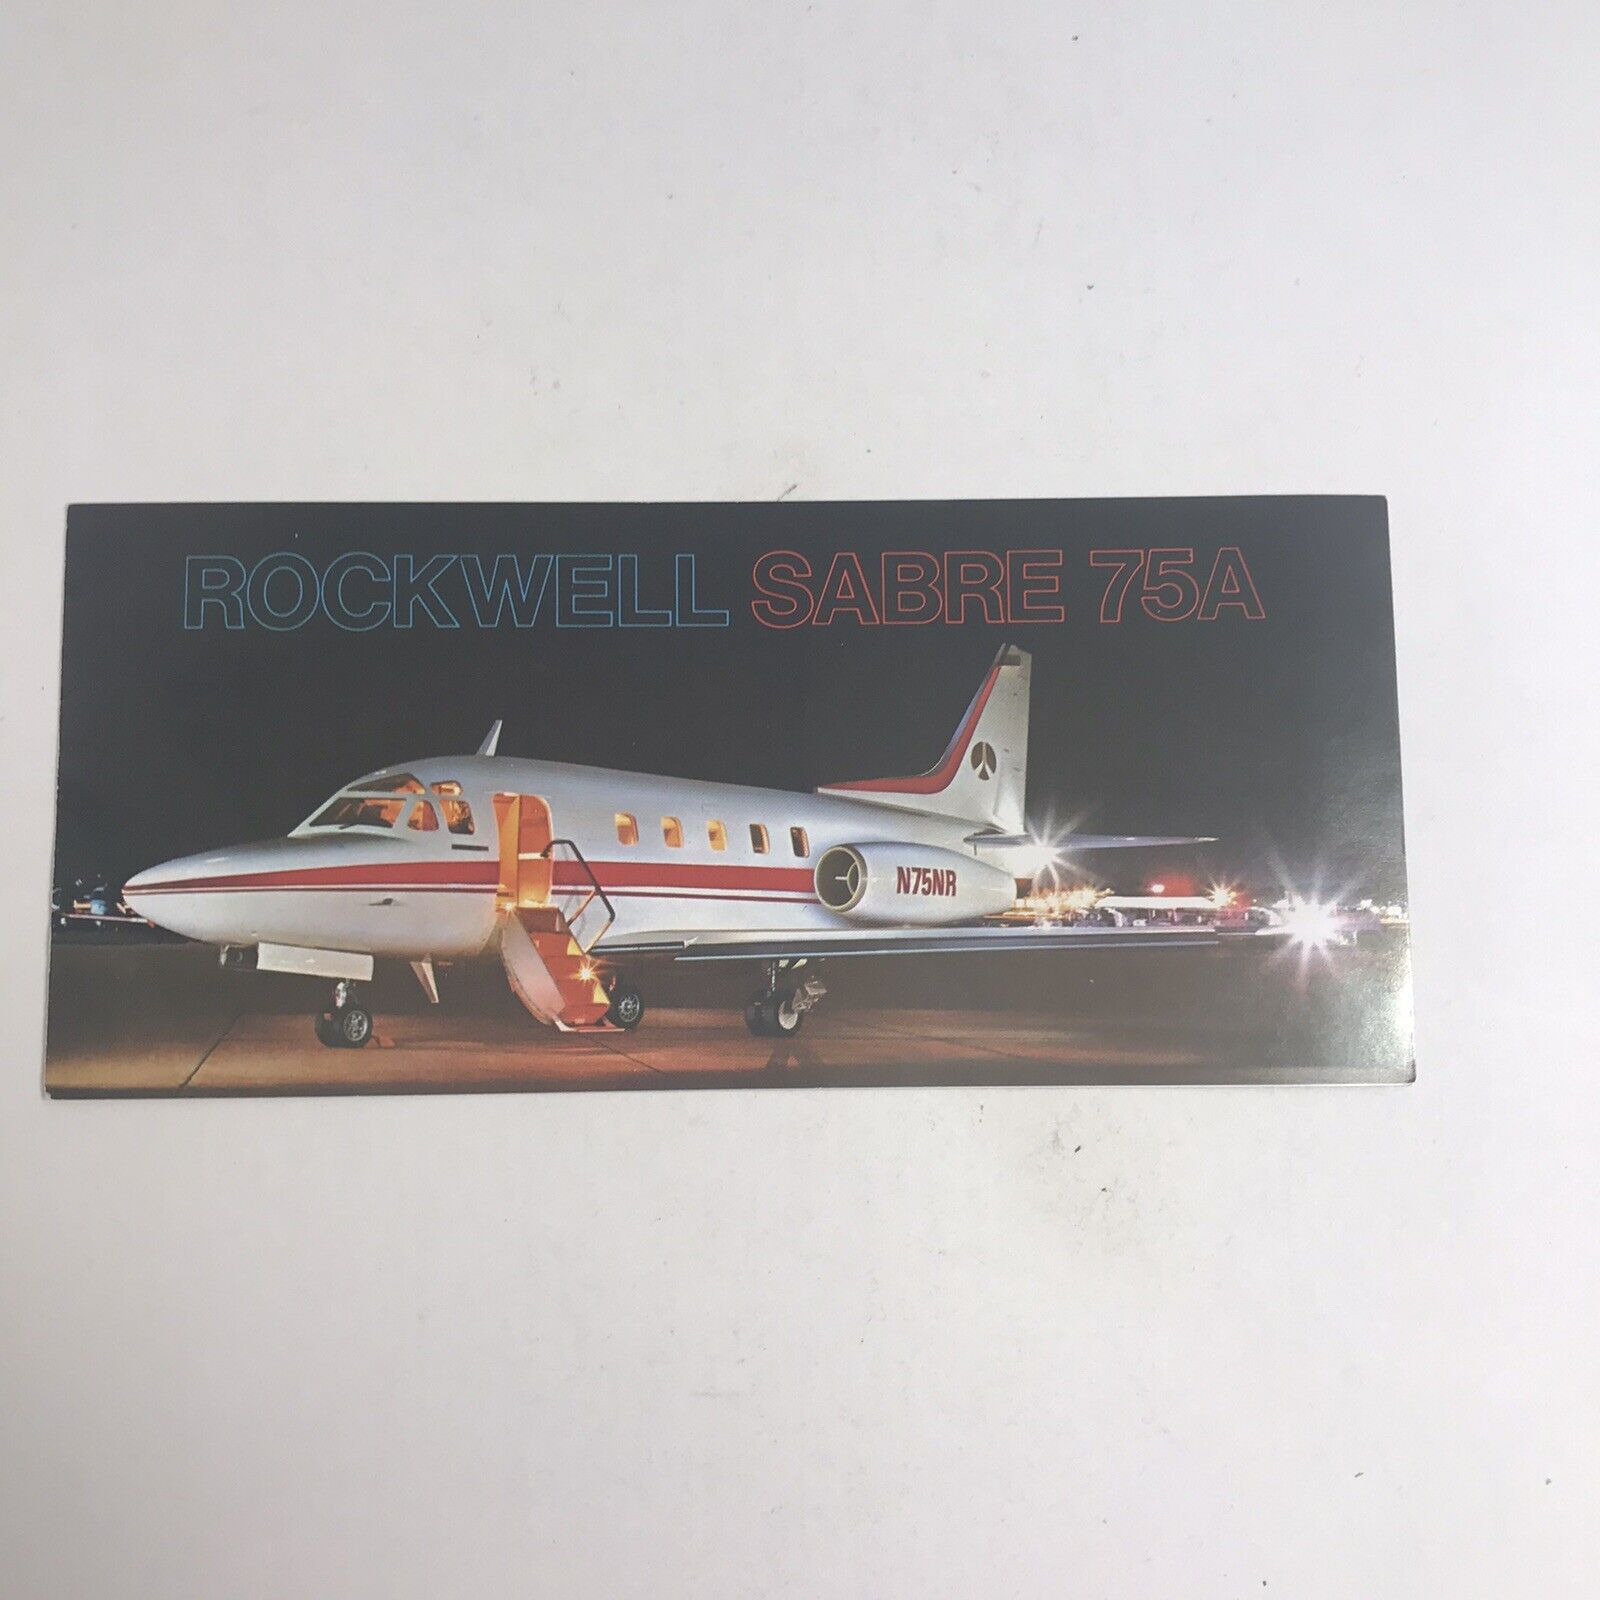 Rockwell Sabre 75A Booklet Brochure Information Plane Airplane